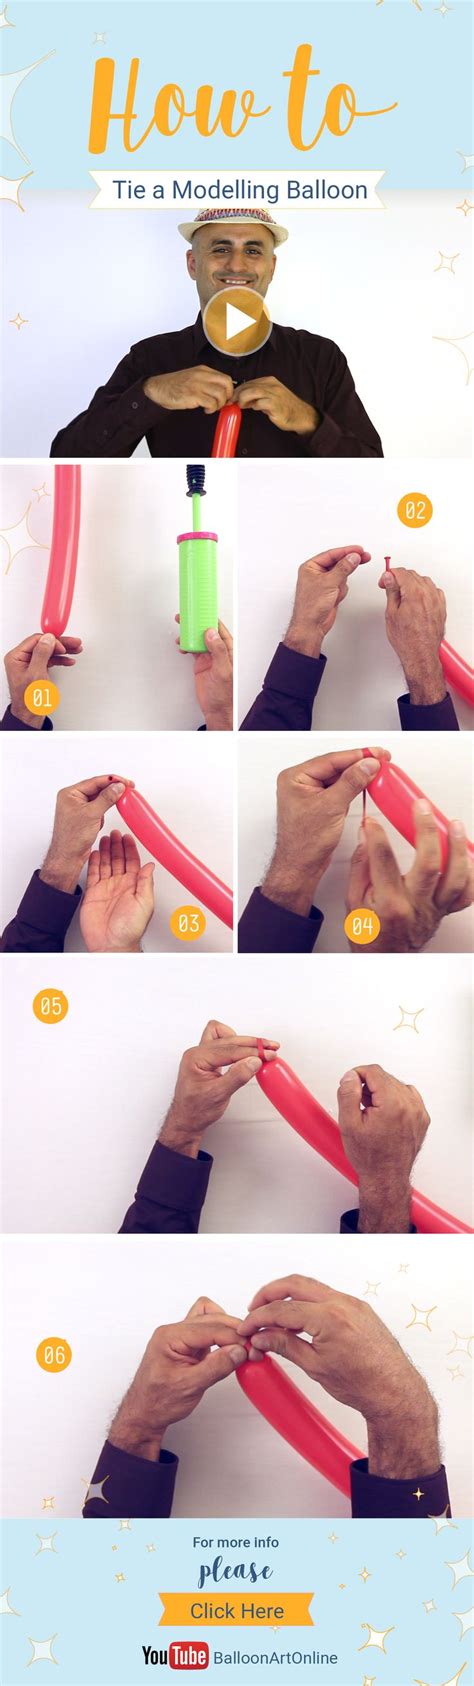 How To Tie A Modelling Balloon A Step By Step Video Tutorial